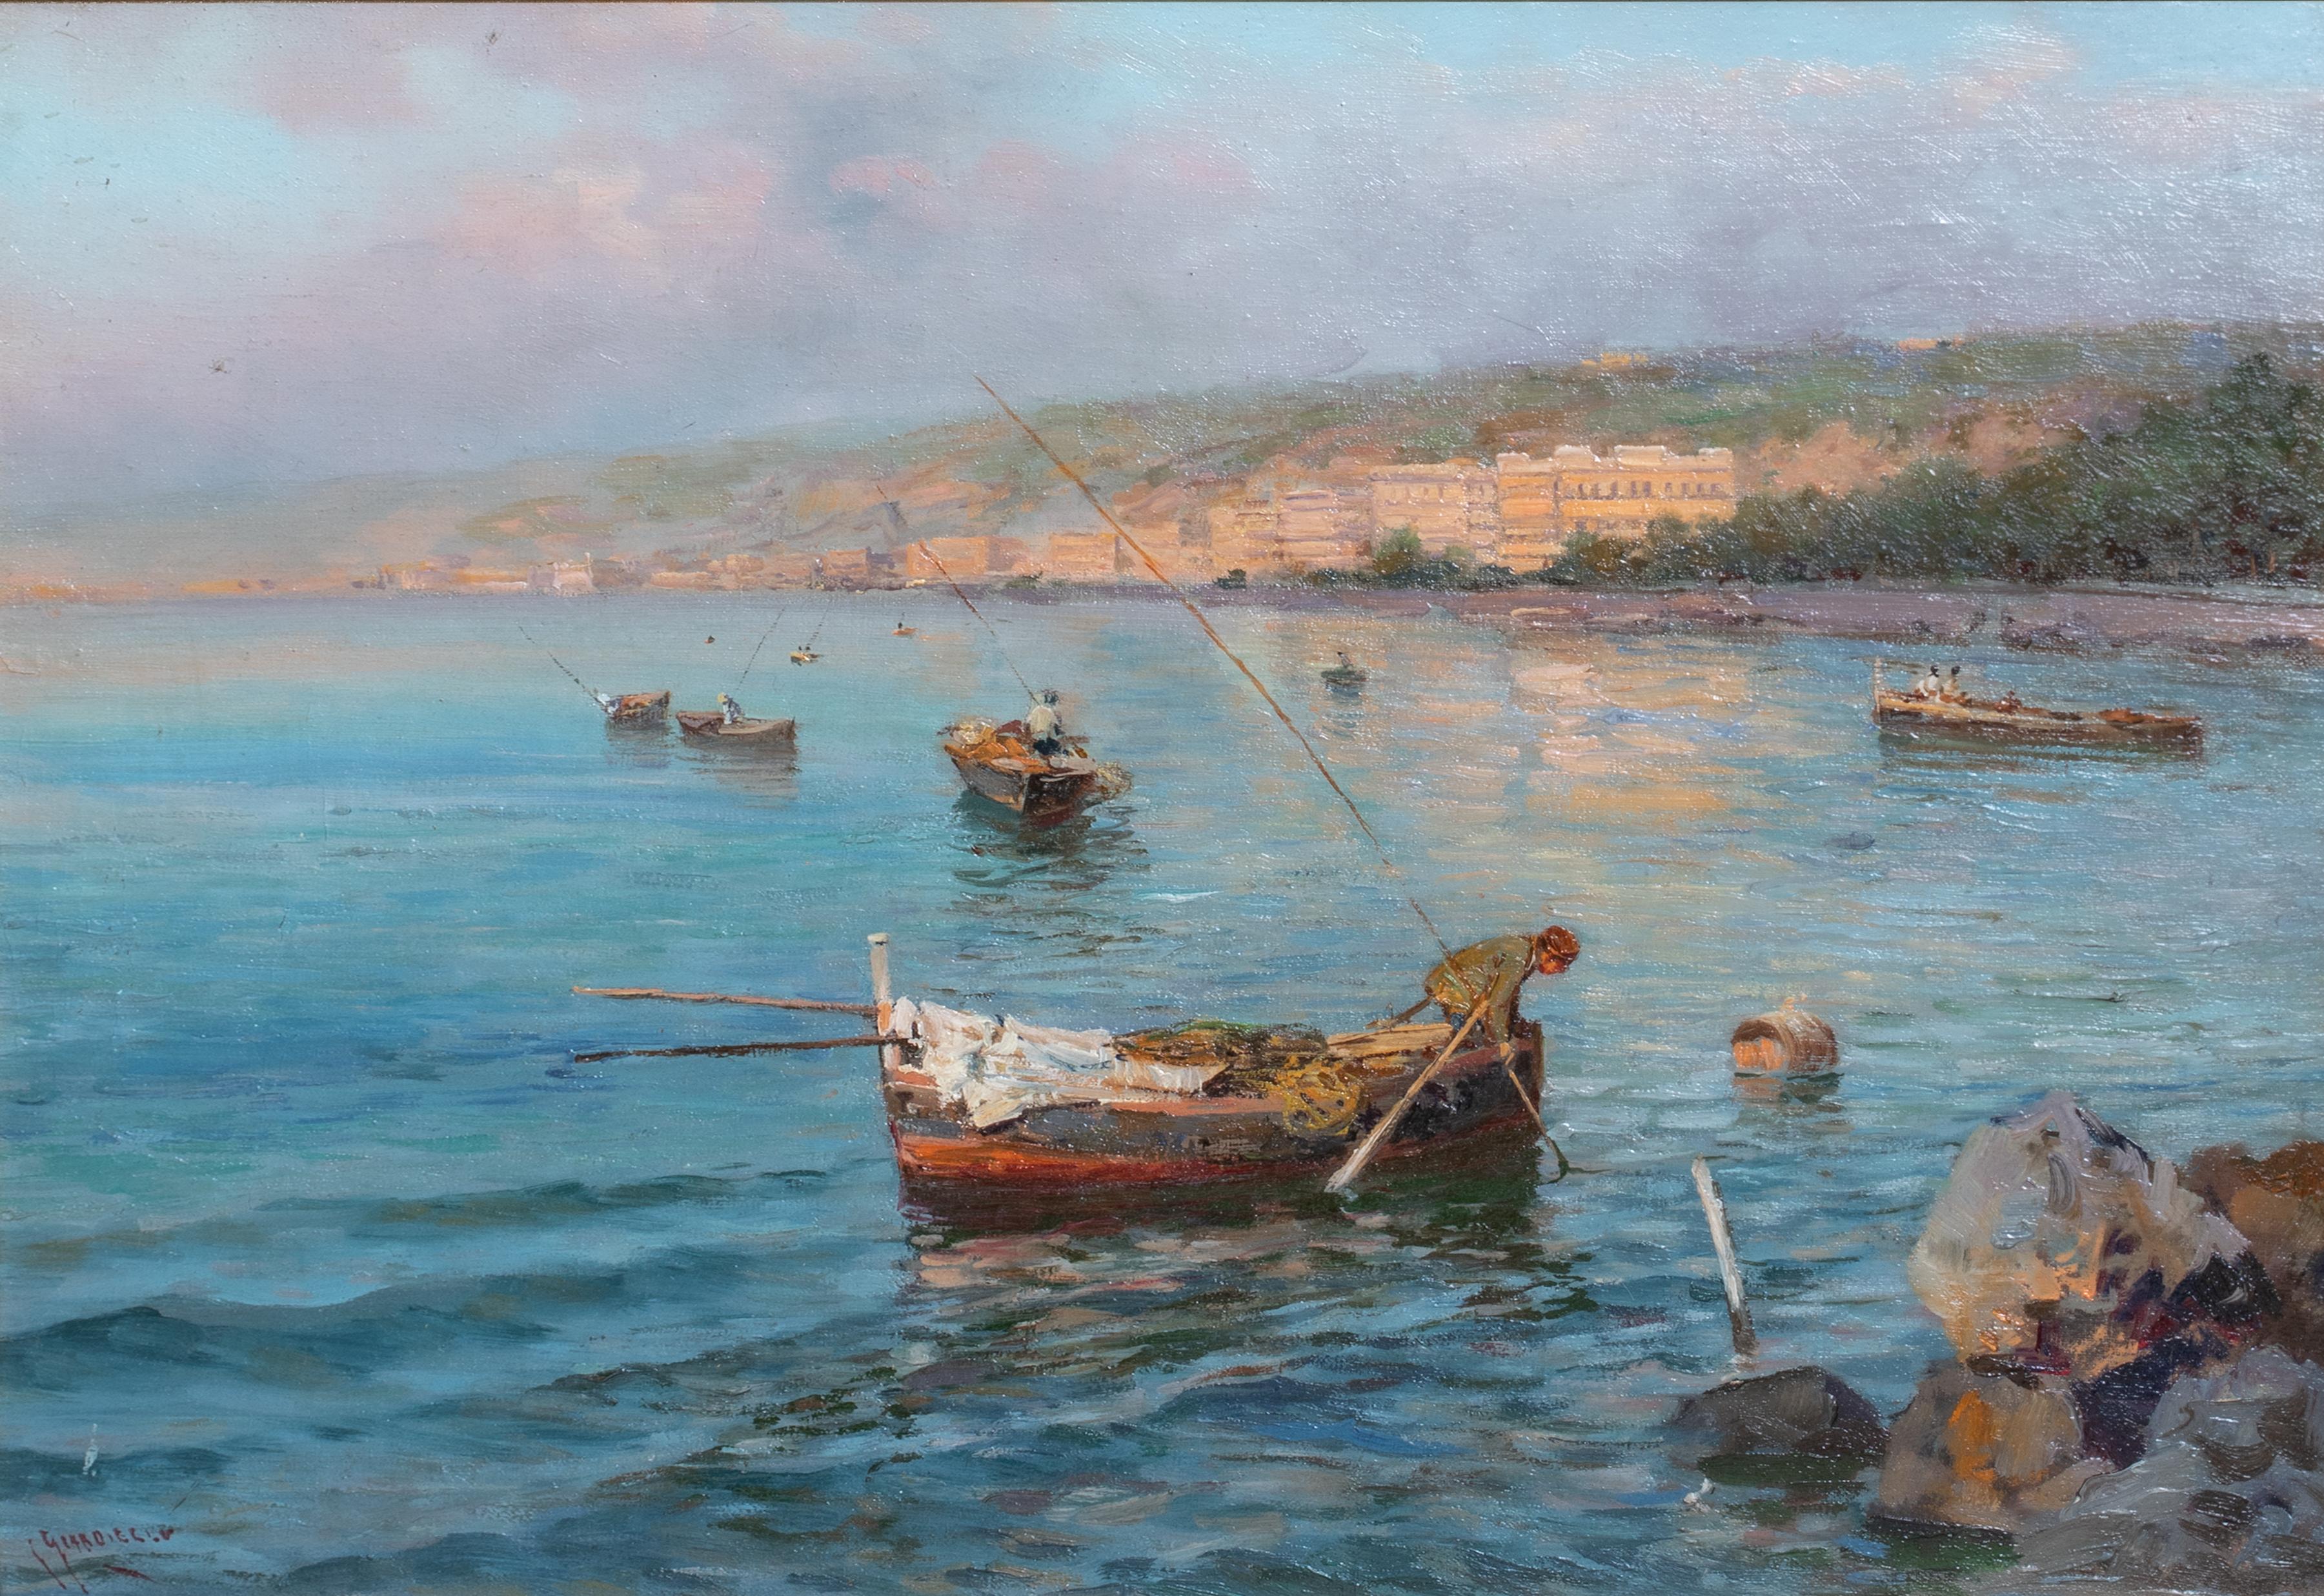 Fishing Off The Bay Of Naples

by GUISEPPE GIARDIELLO (1877-1920) sales to $23,000

Large 19th Century Italian view of figures fishing off the Bay Of Naples, oil on board by Guiseppe Giardiello. Excellent quality and condition example of the famous